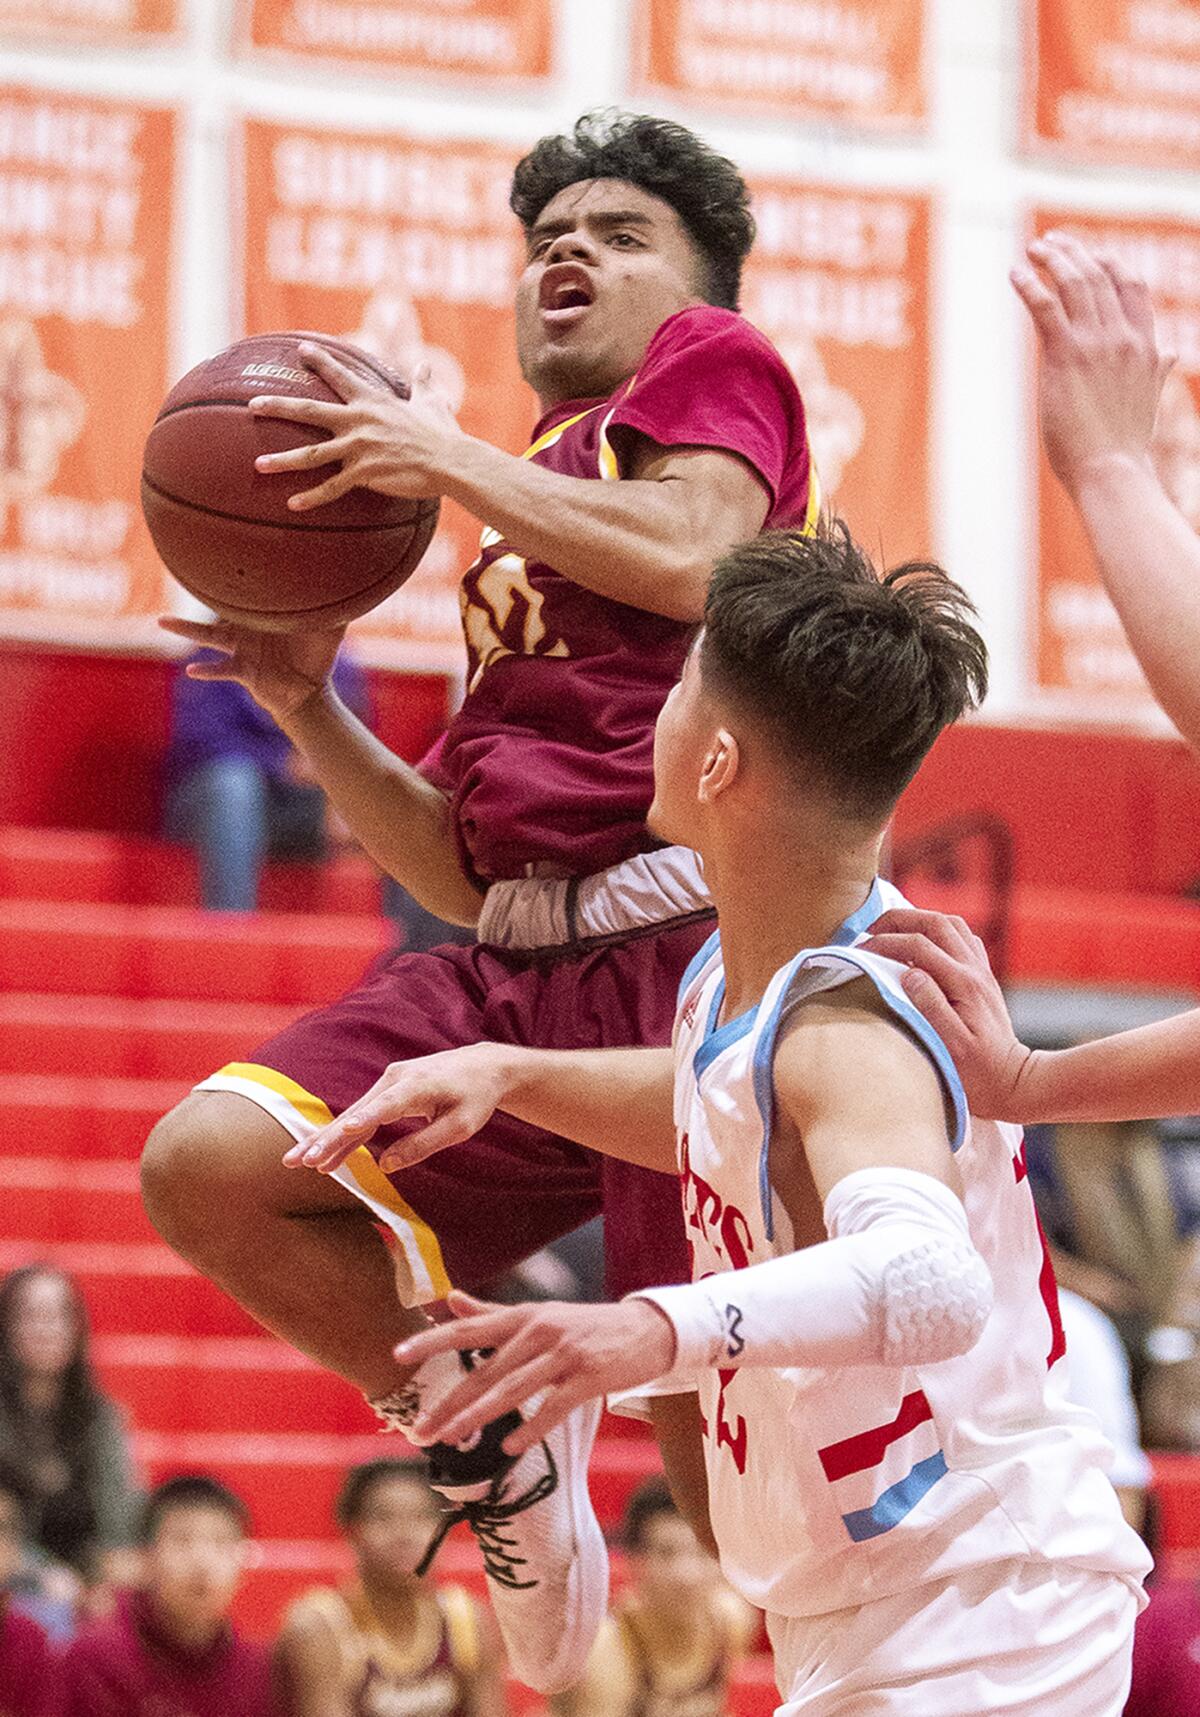 Estancia's Marvin Harry goes up for a shot against Santa Ana's Xavier Valdovinos during an Orange Coast League game on the road Wednesday.